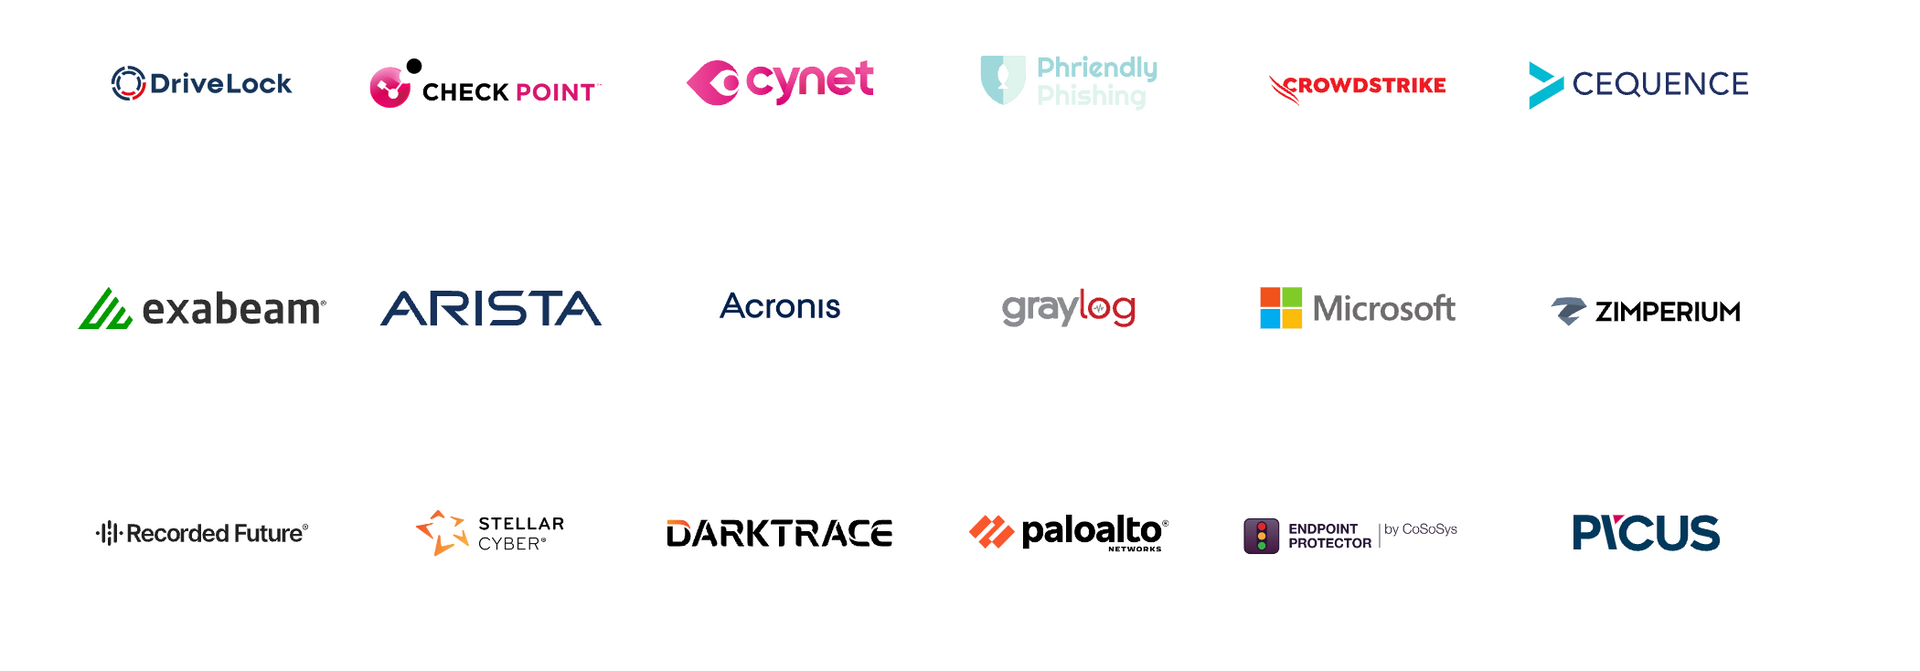 a bunch of logos on a white background including one for microsoft